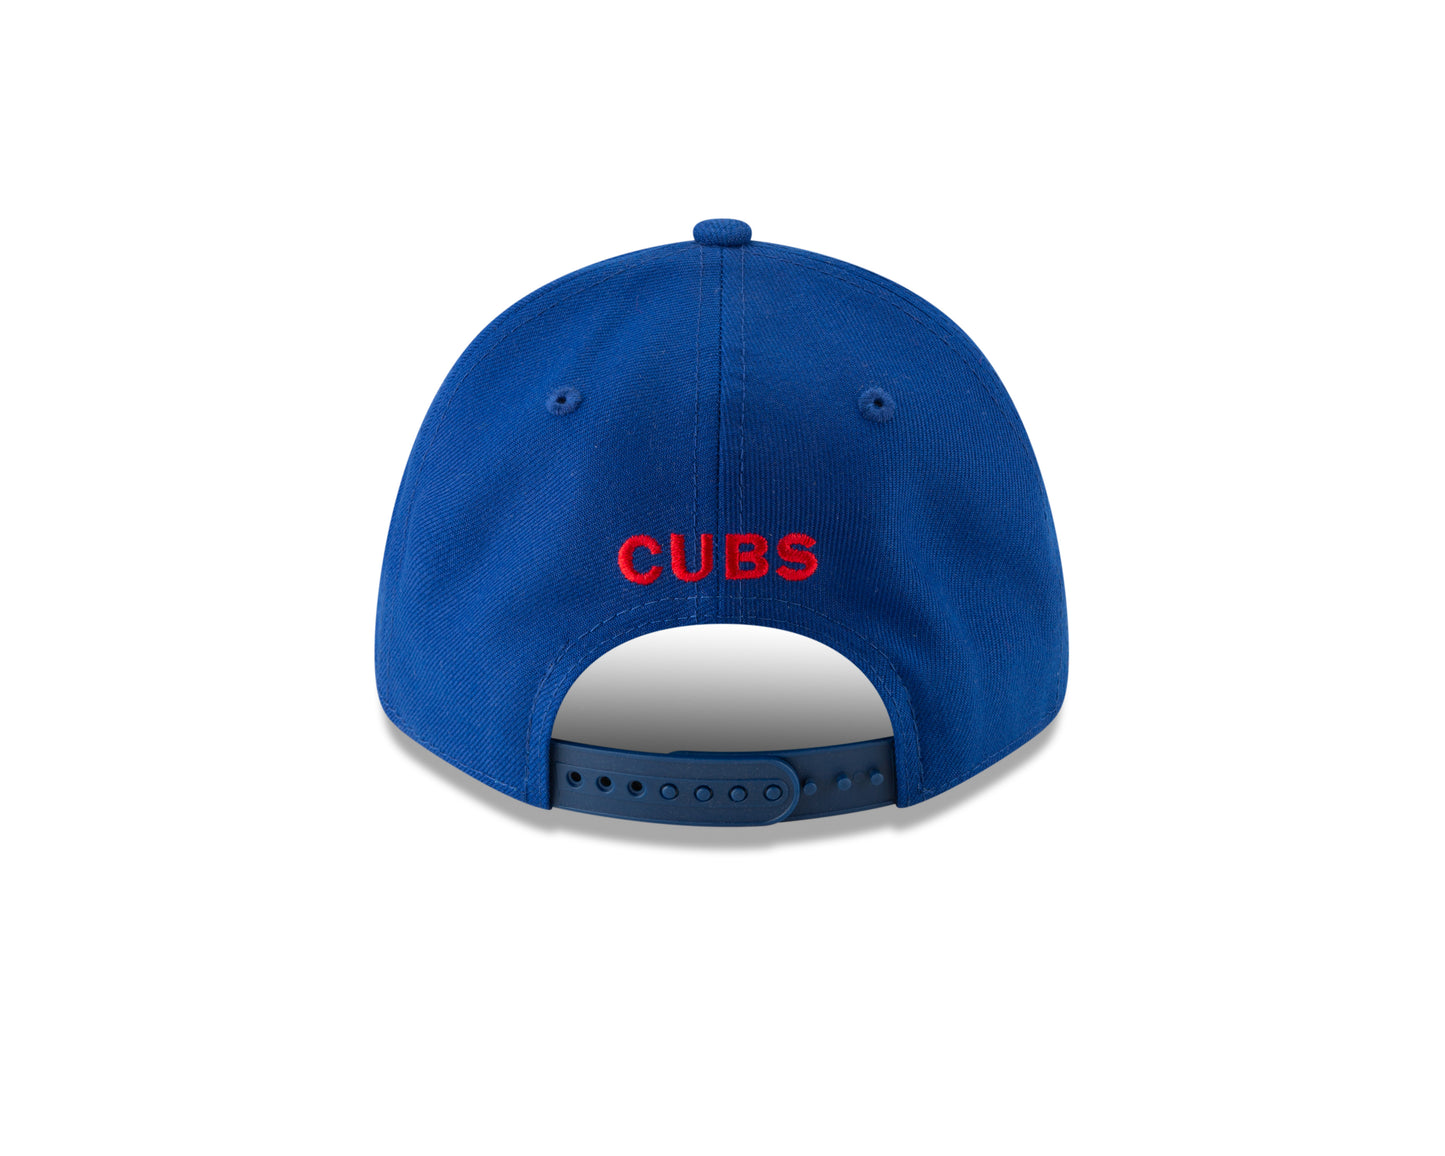 Loudmouth Golf Chicago Cubs 9FORTY Adjustable Hat By New Era